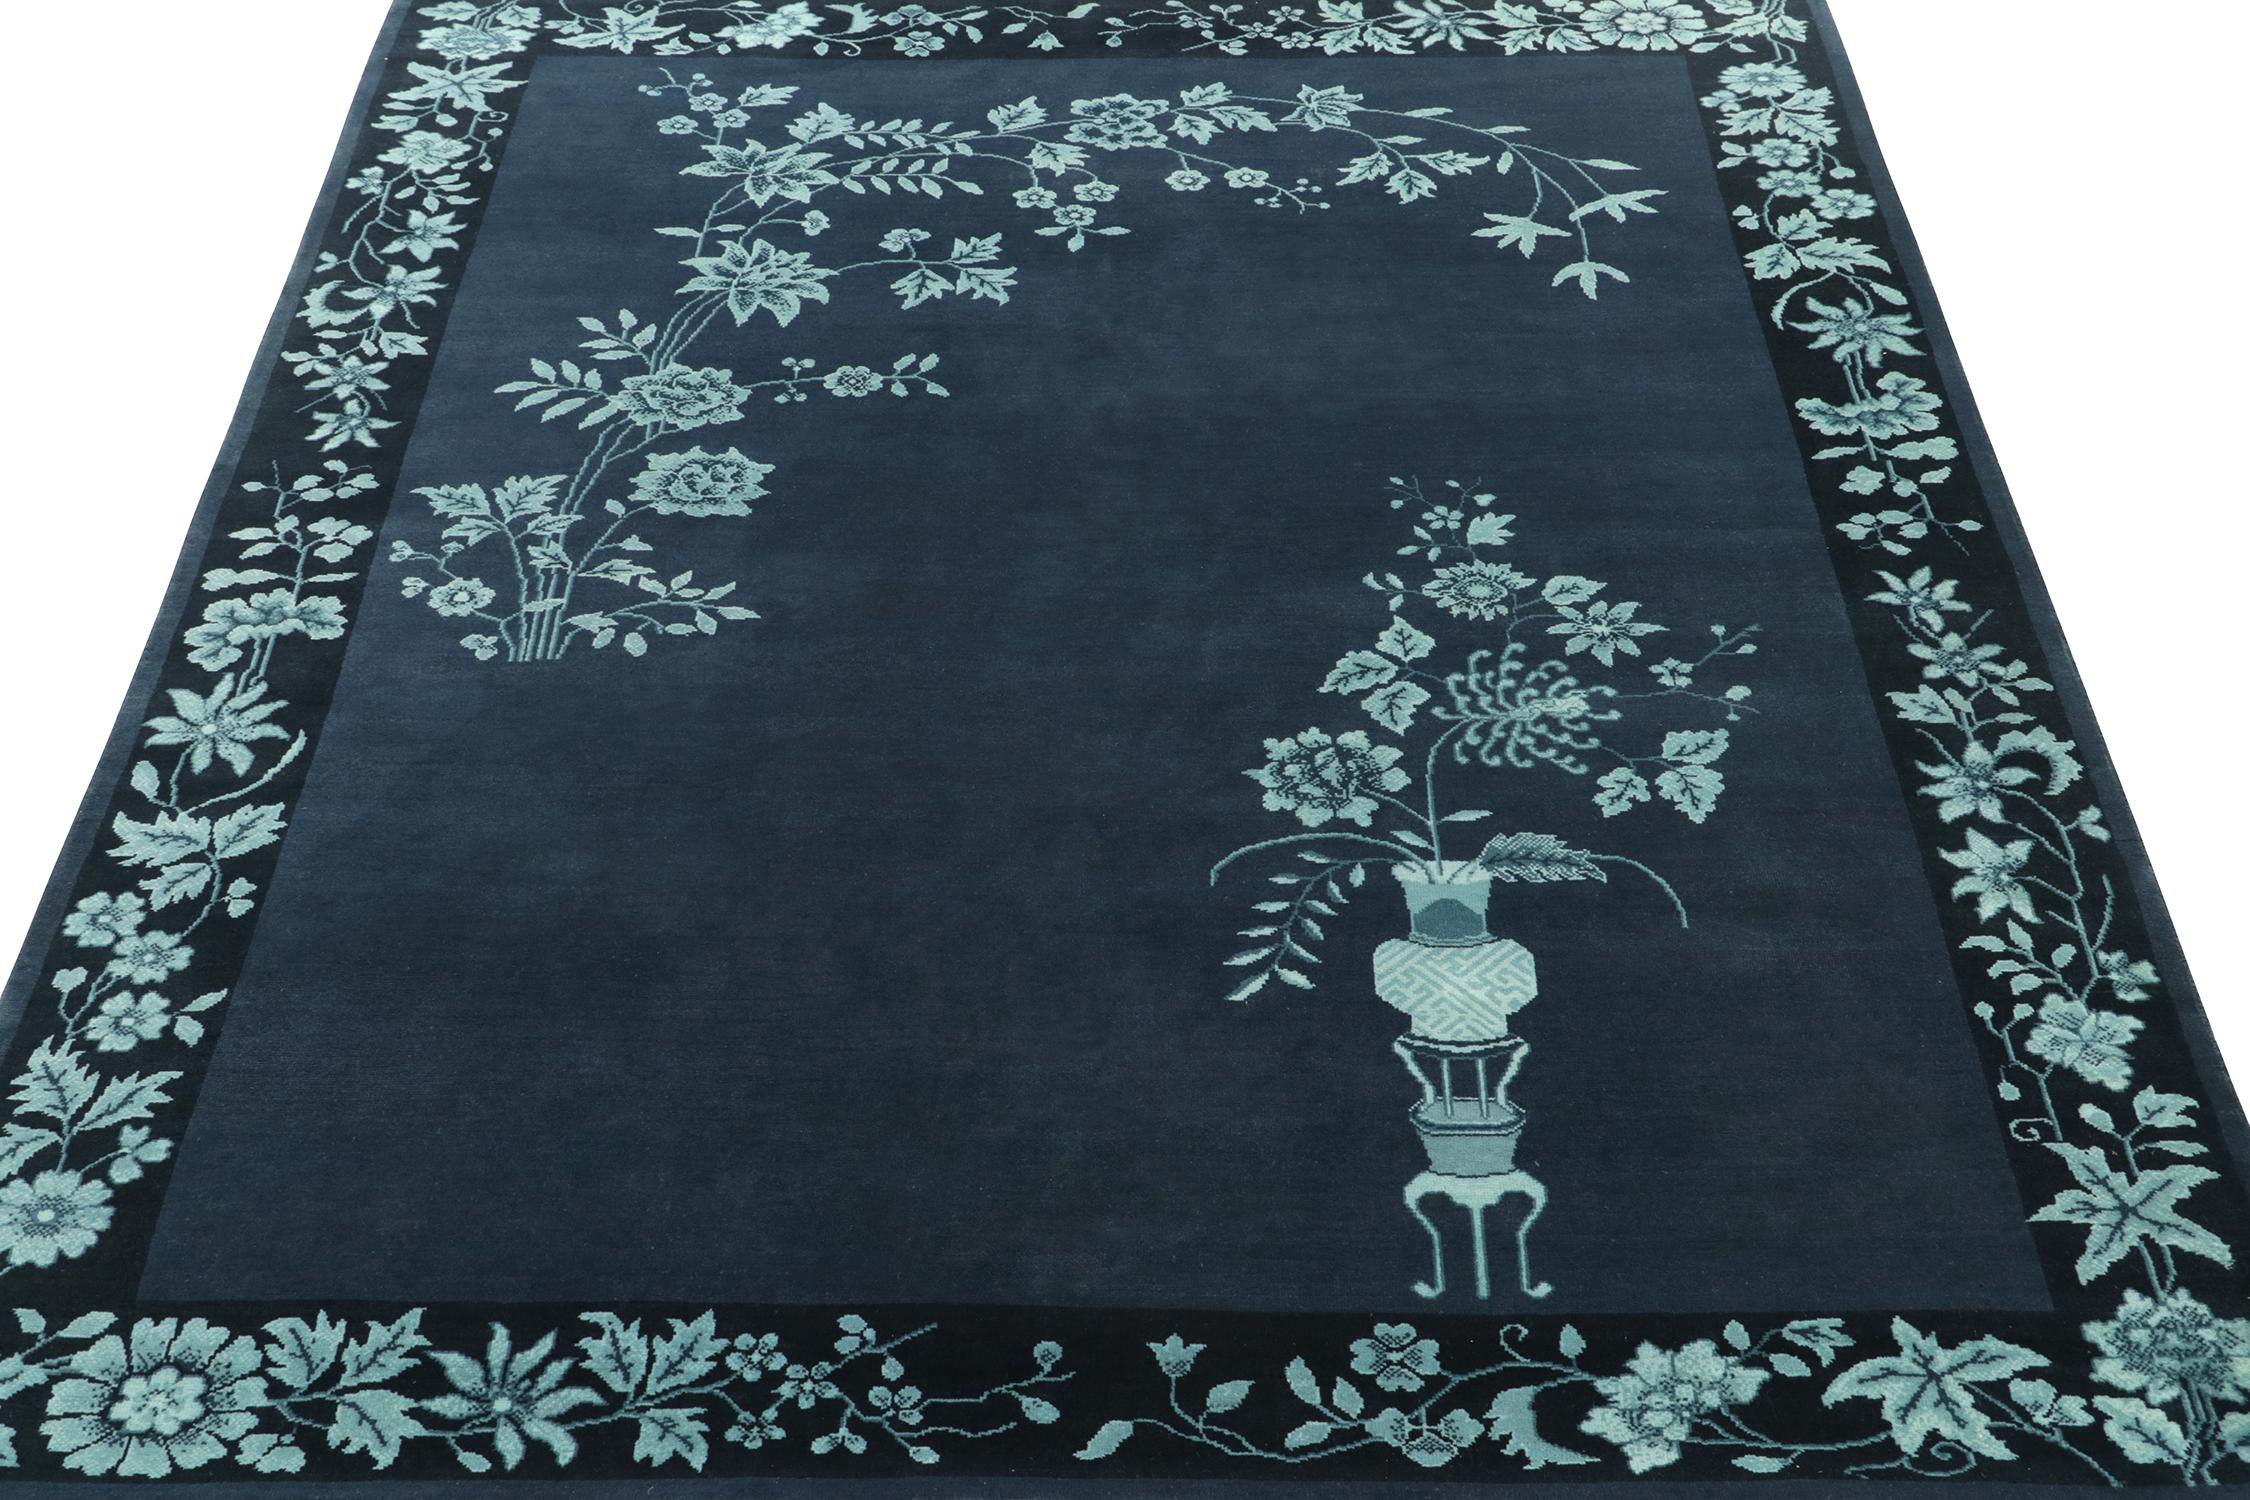 Art Deco Chinese Deco Style Rug in Blue Floral Patterns by Rug & Kilim For Sale